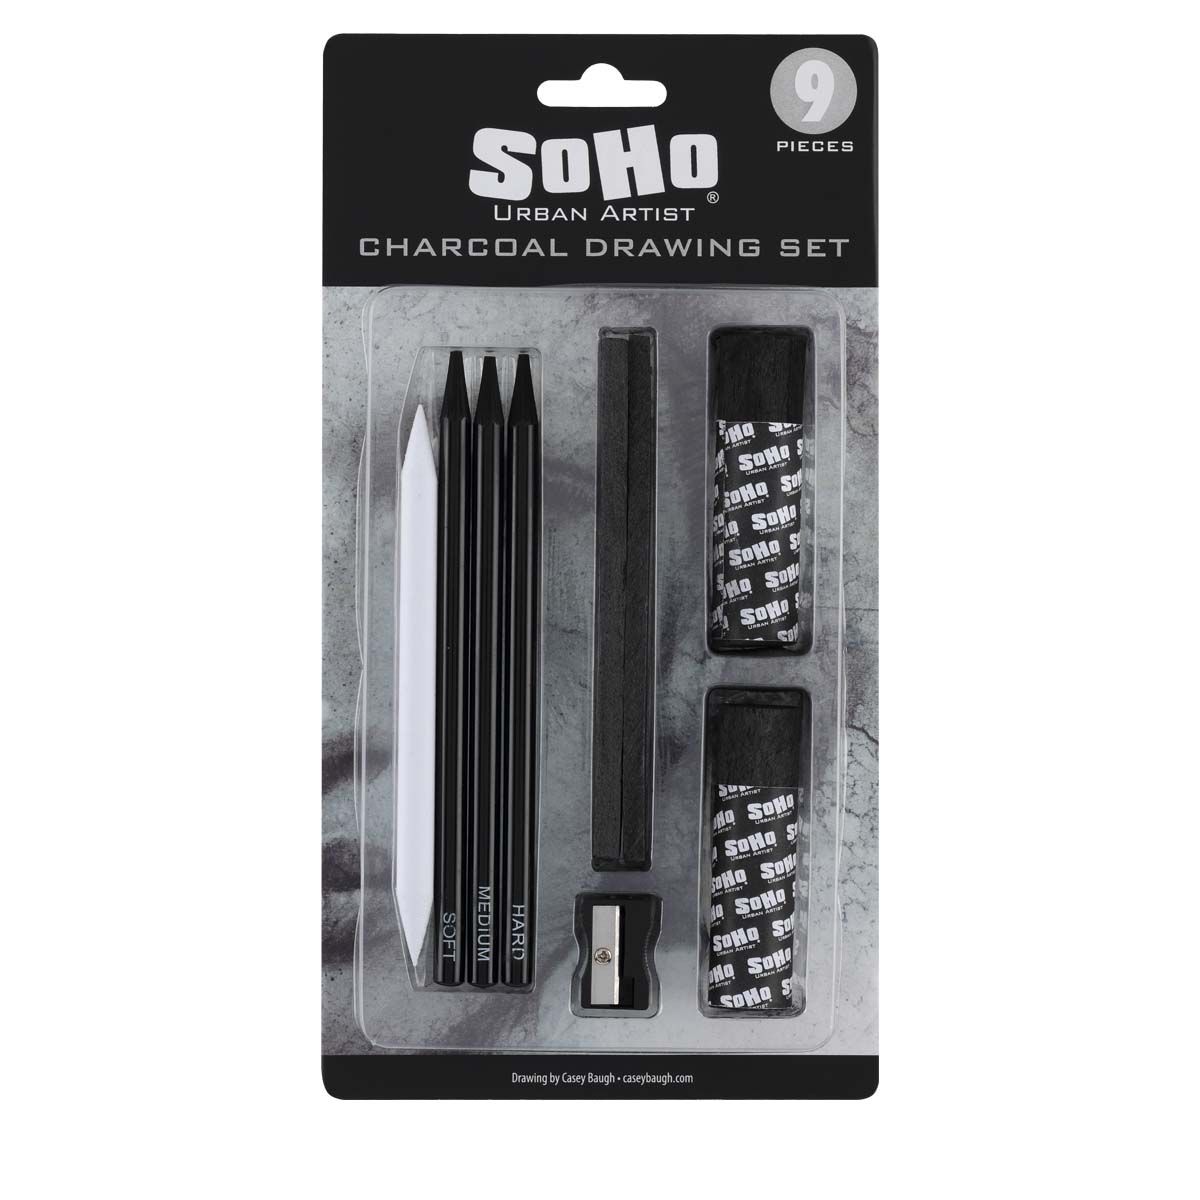 Soho Urban Artist Willow Charcoal - Drawing Charcoal for Artists, Students, Blending, Live Figure Drawing, & More! - Black - Set of 15 Mixed Sizes